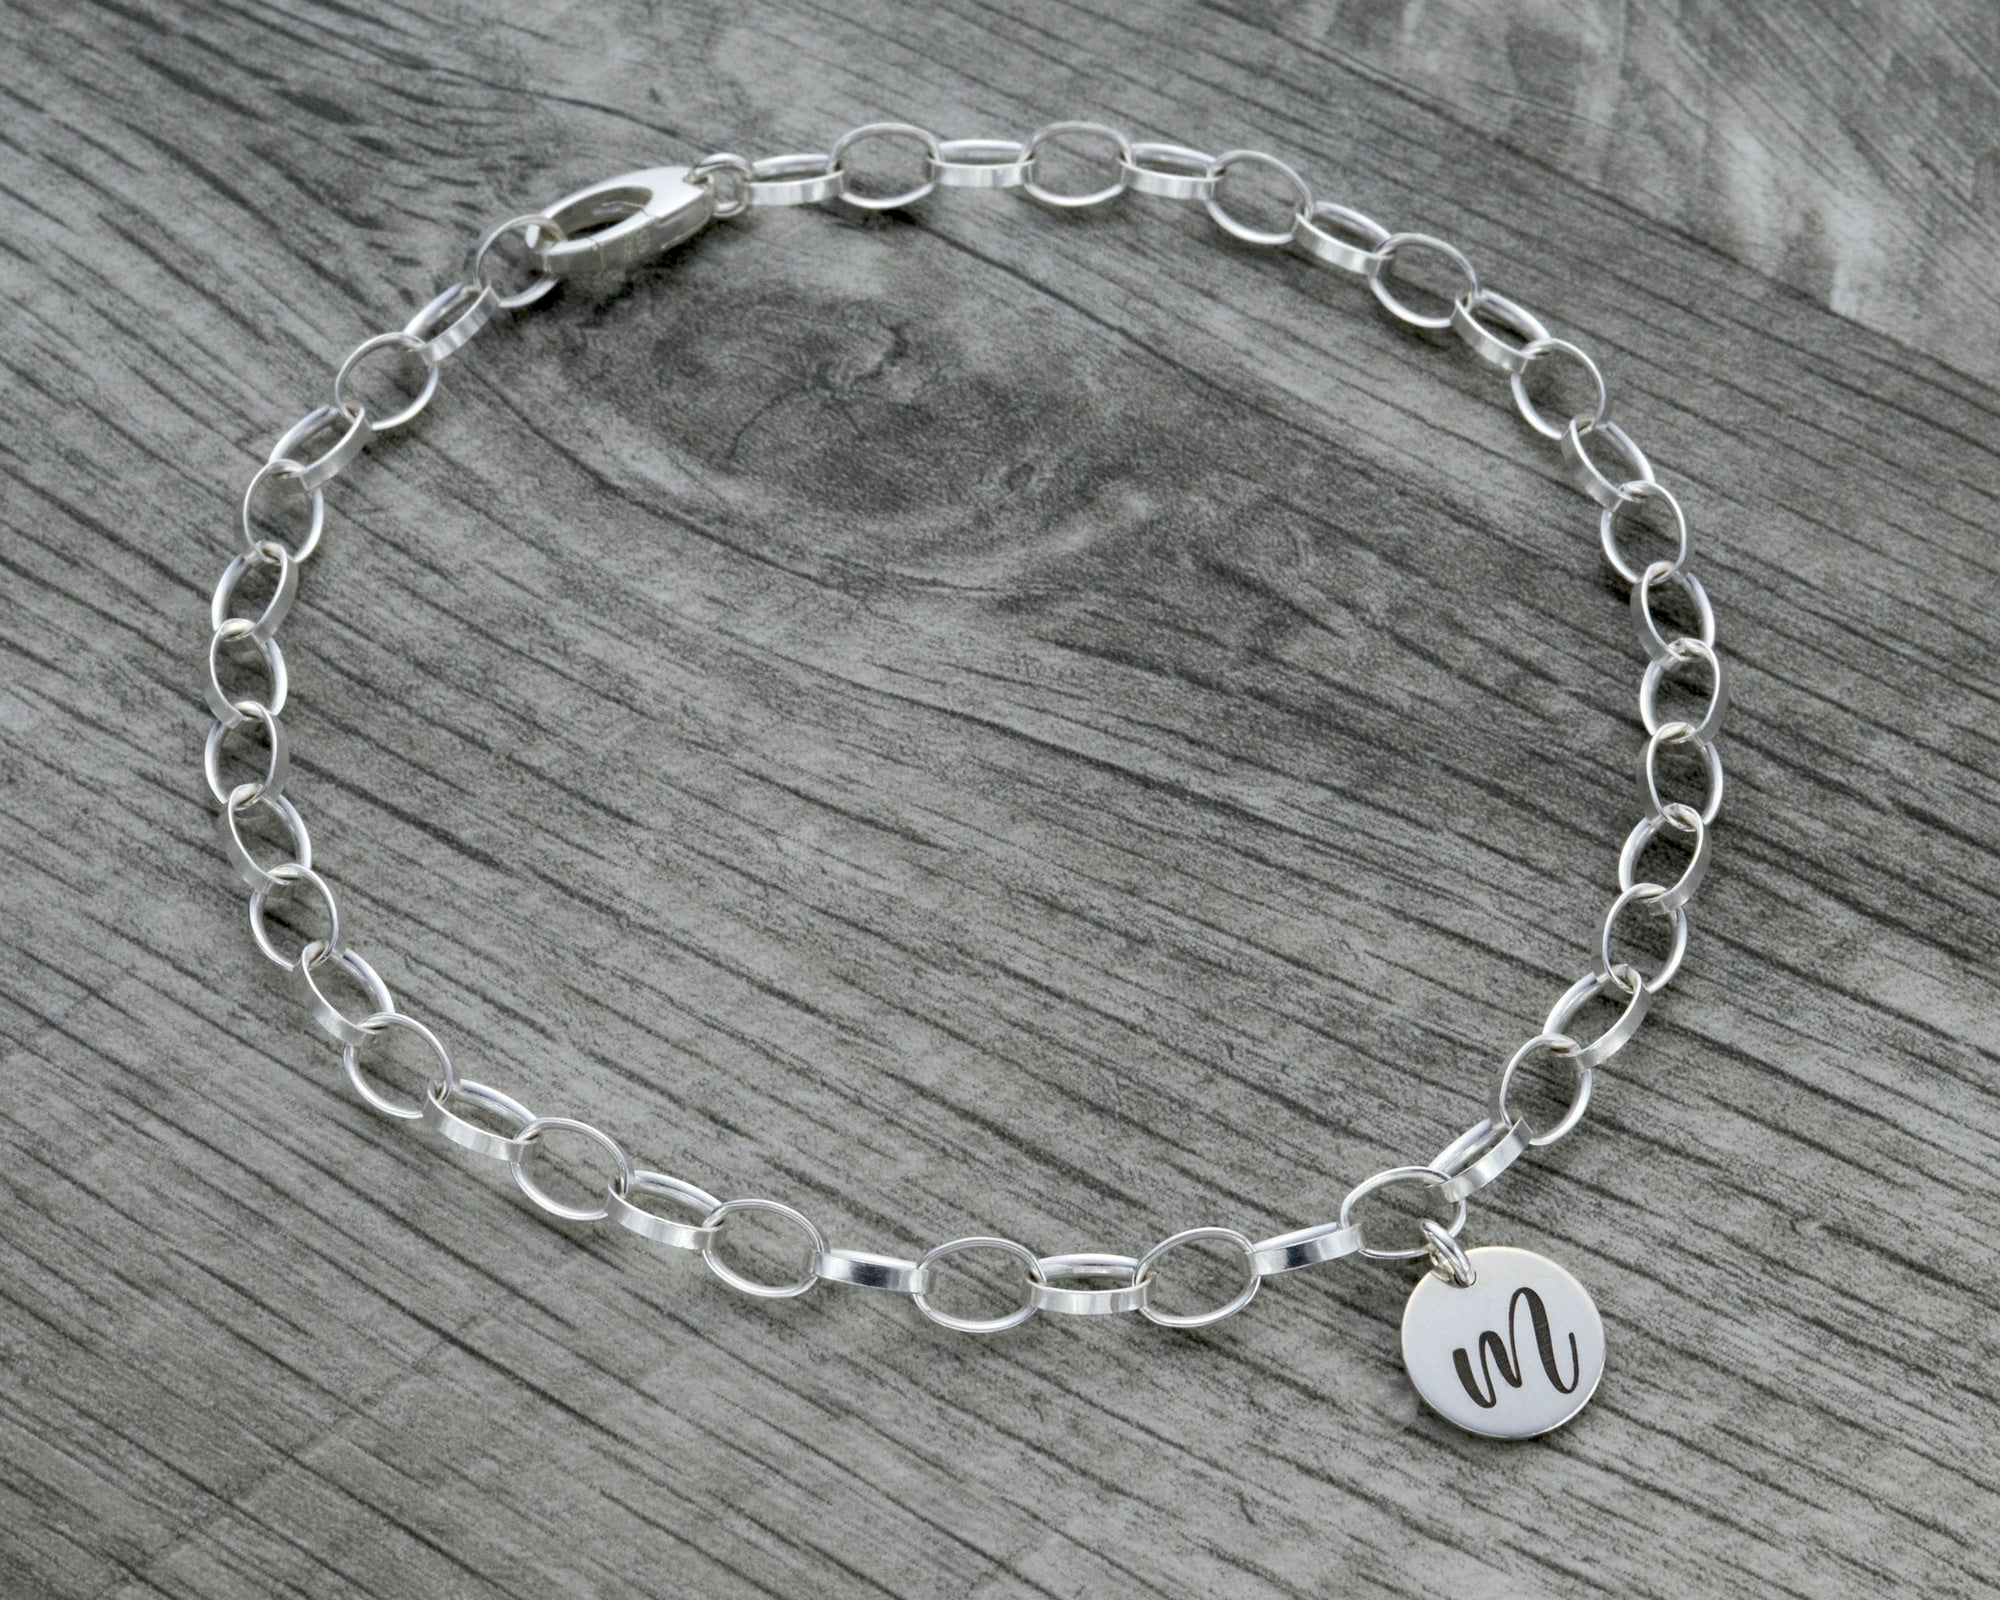 Personalized initial ankle bracelet in sterling silver